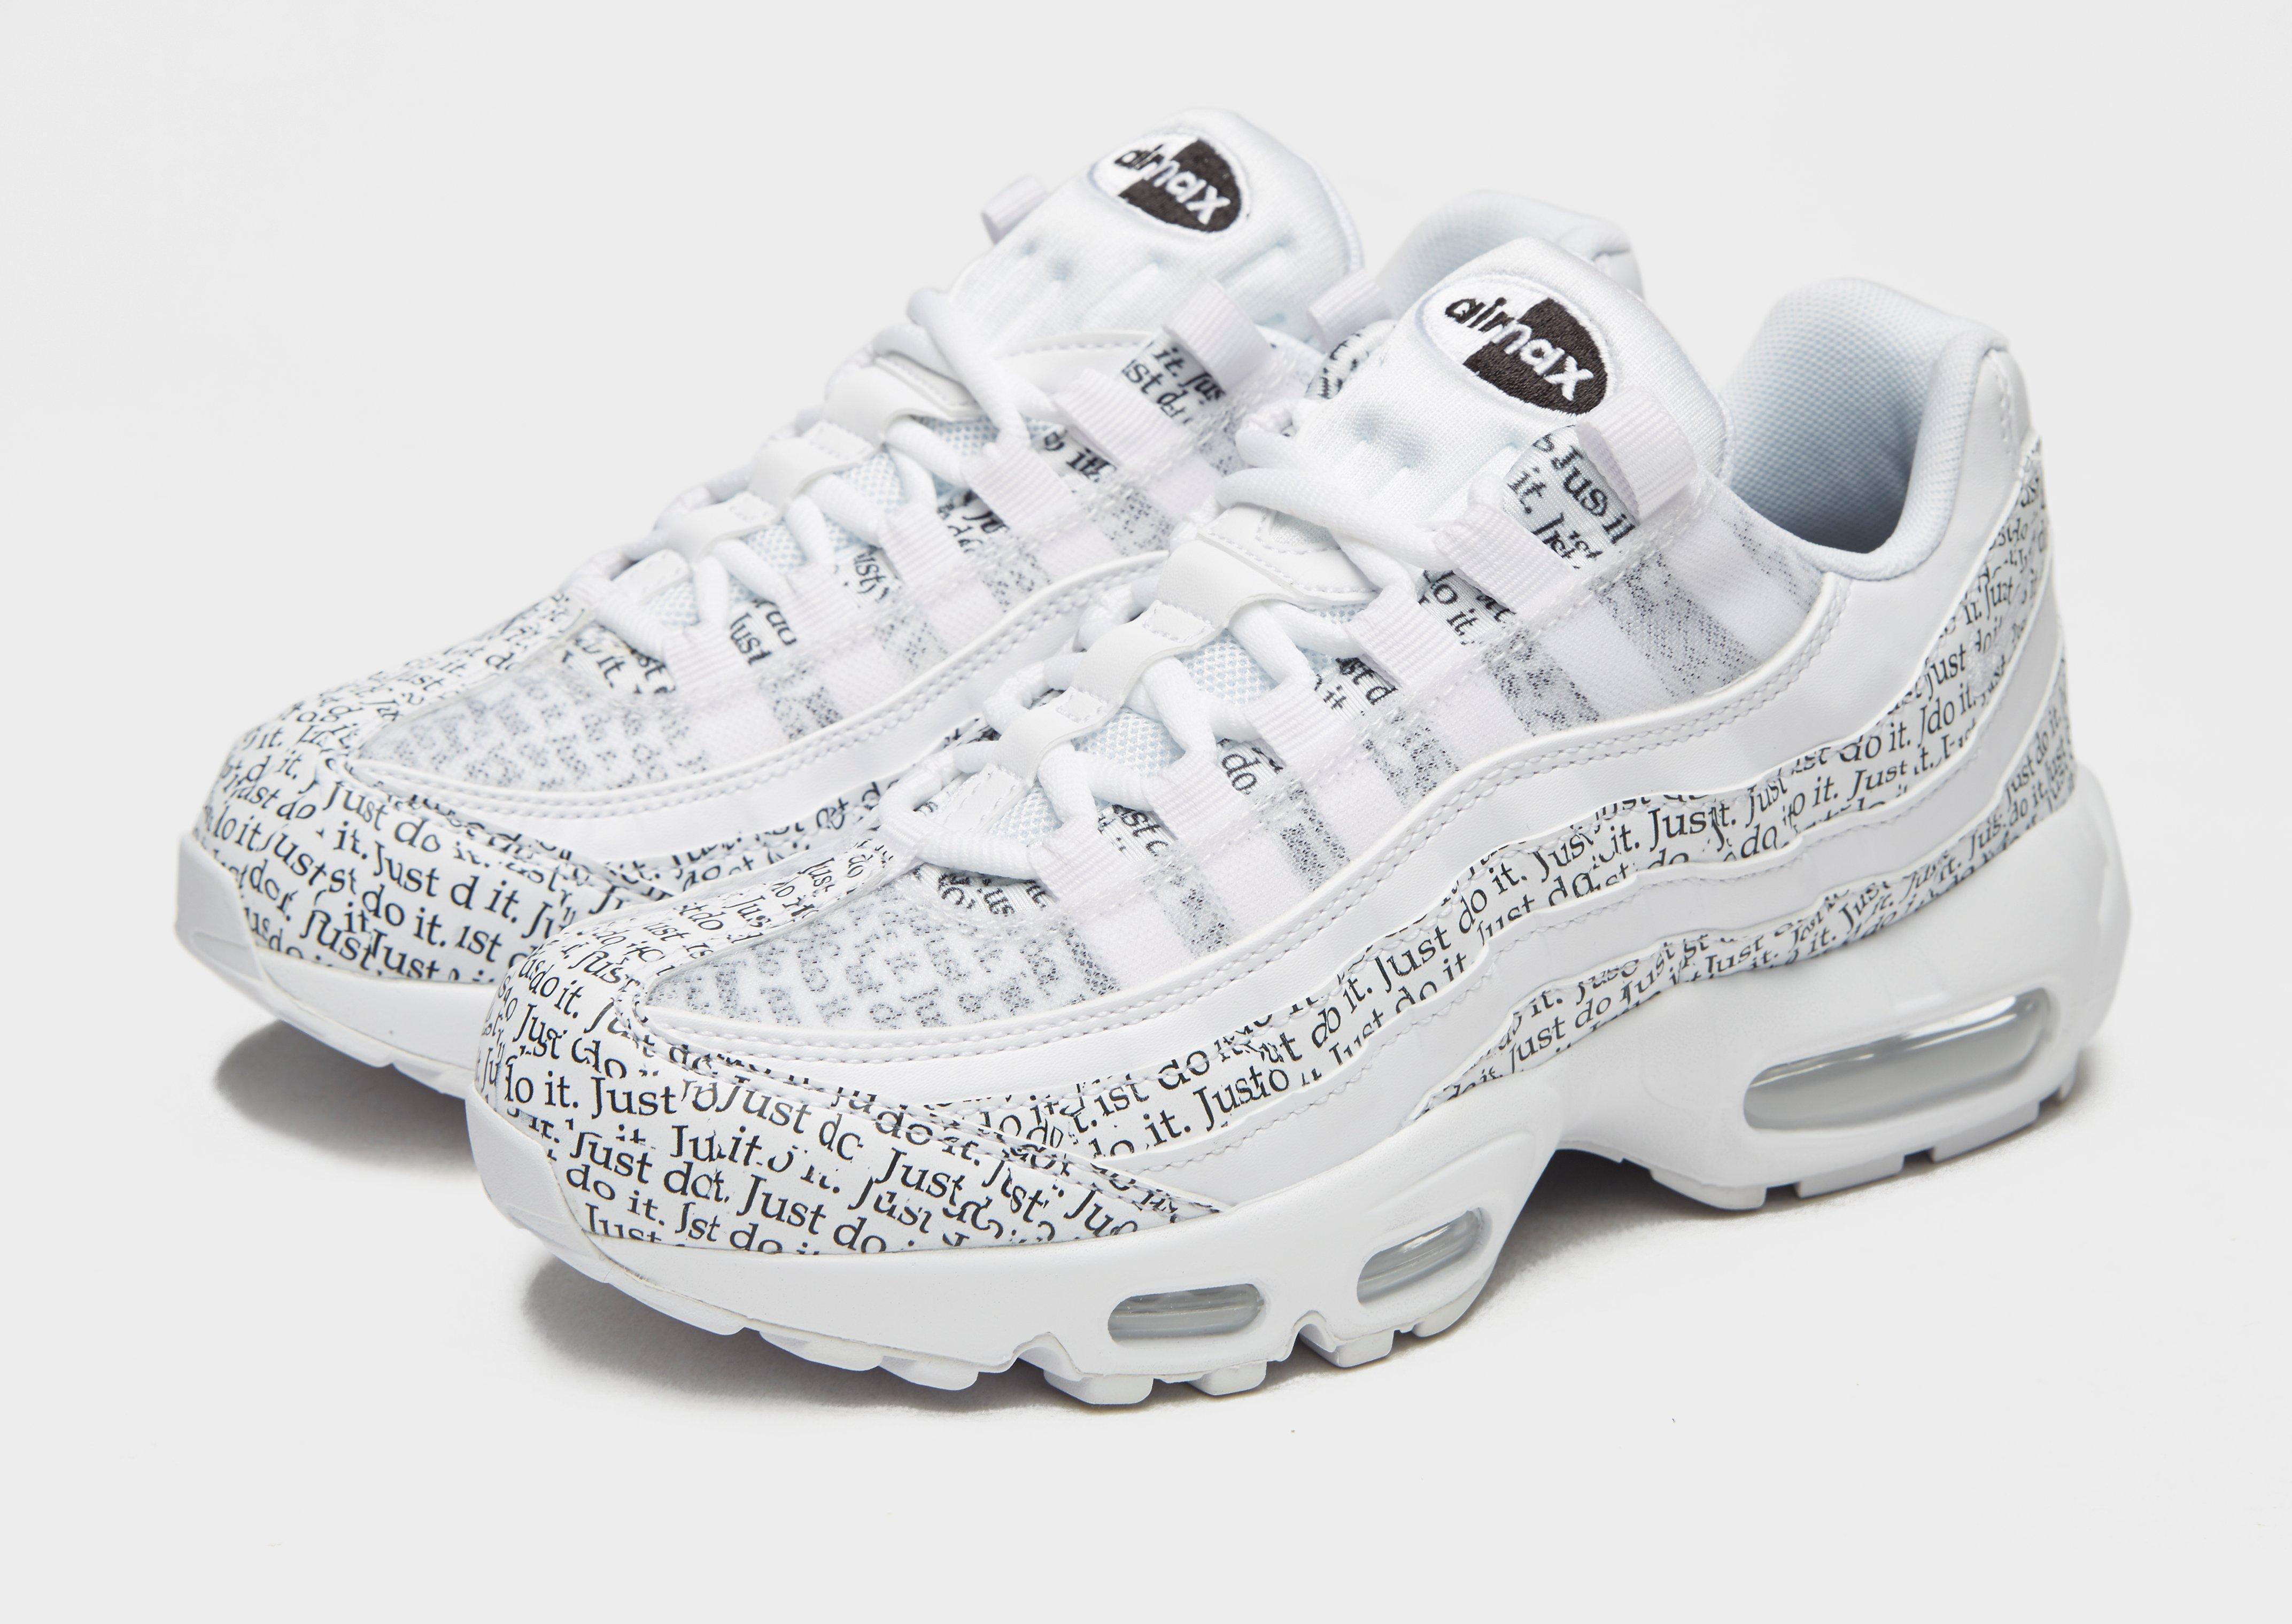 Nike Leather Air Max 95 'just Do It' in White - Lyst